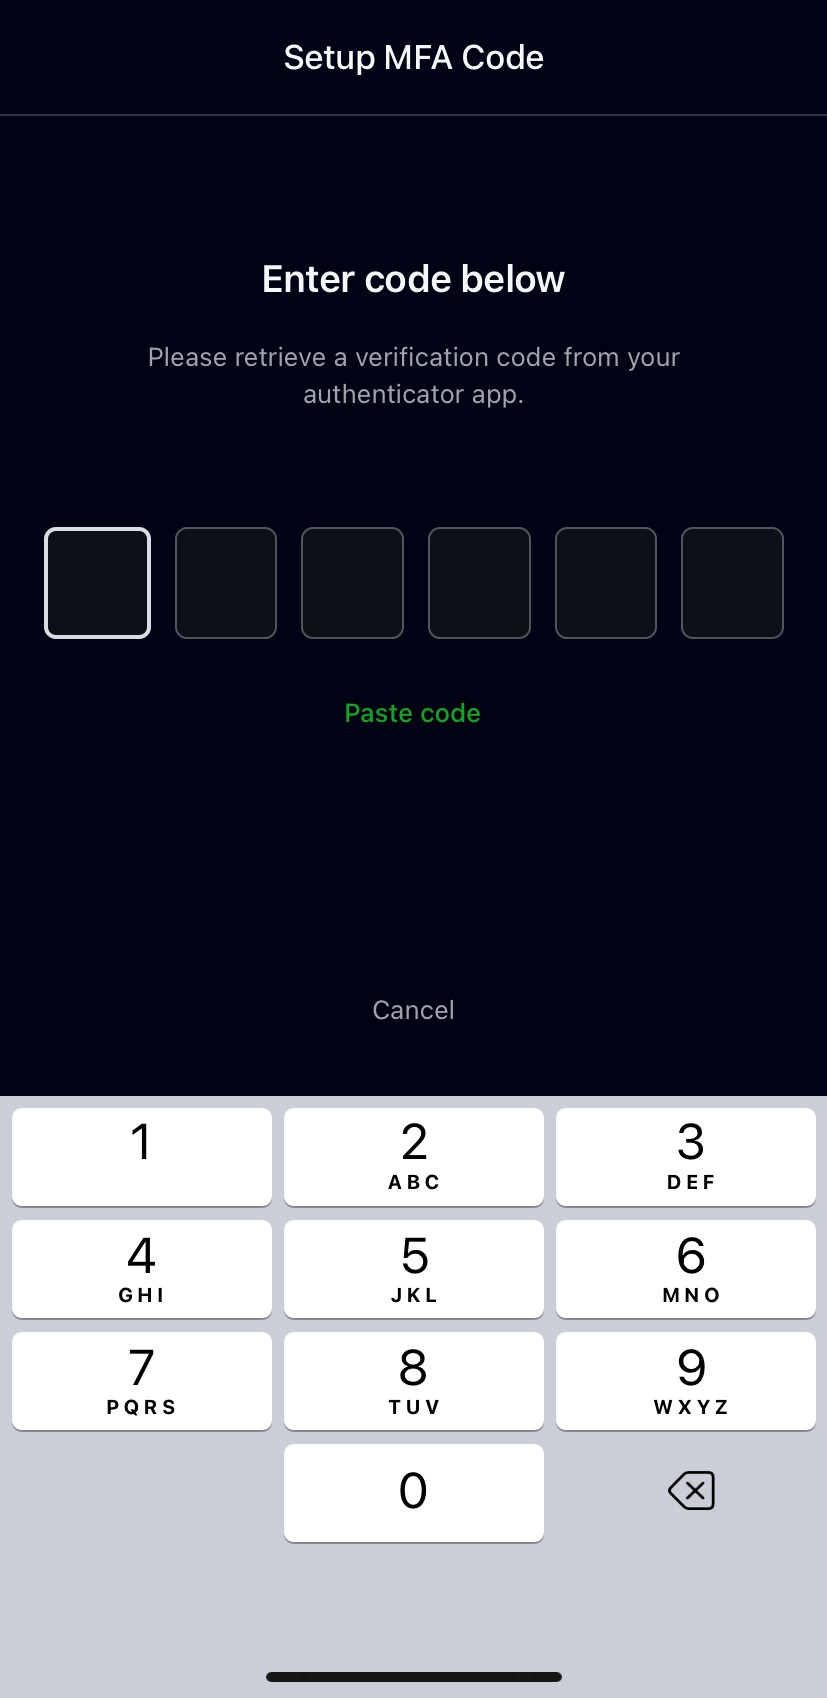 A screenshot of the screen to enter a multi-factor authentication code from an authenticator app on the Smartabase app.